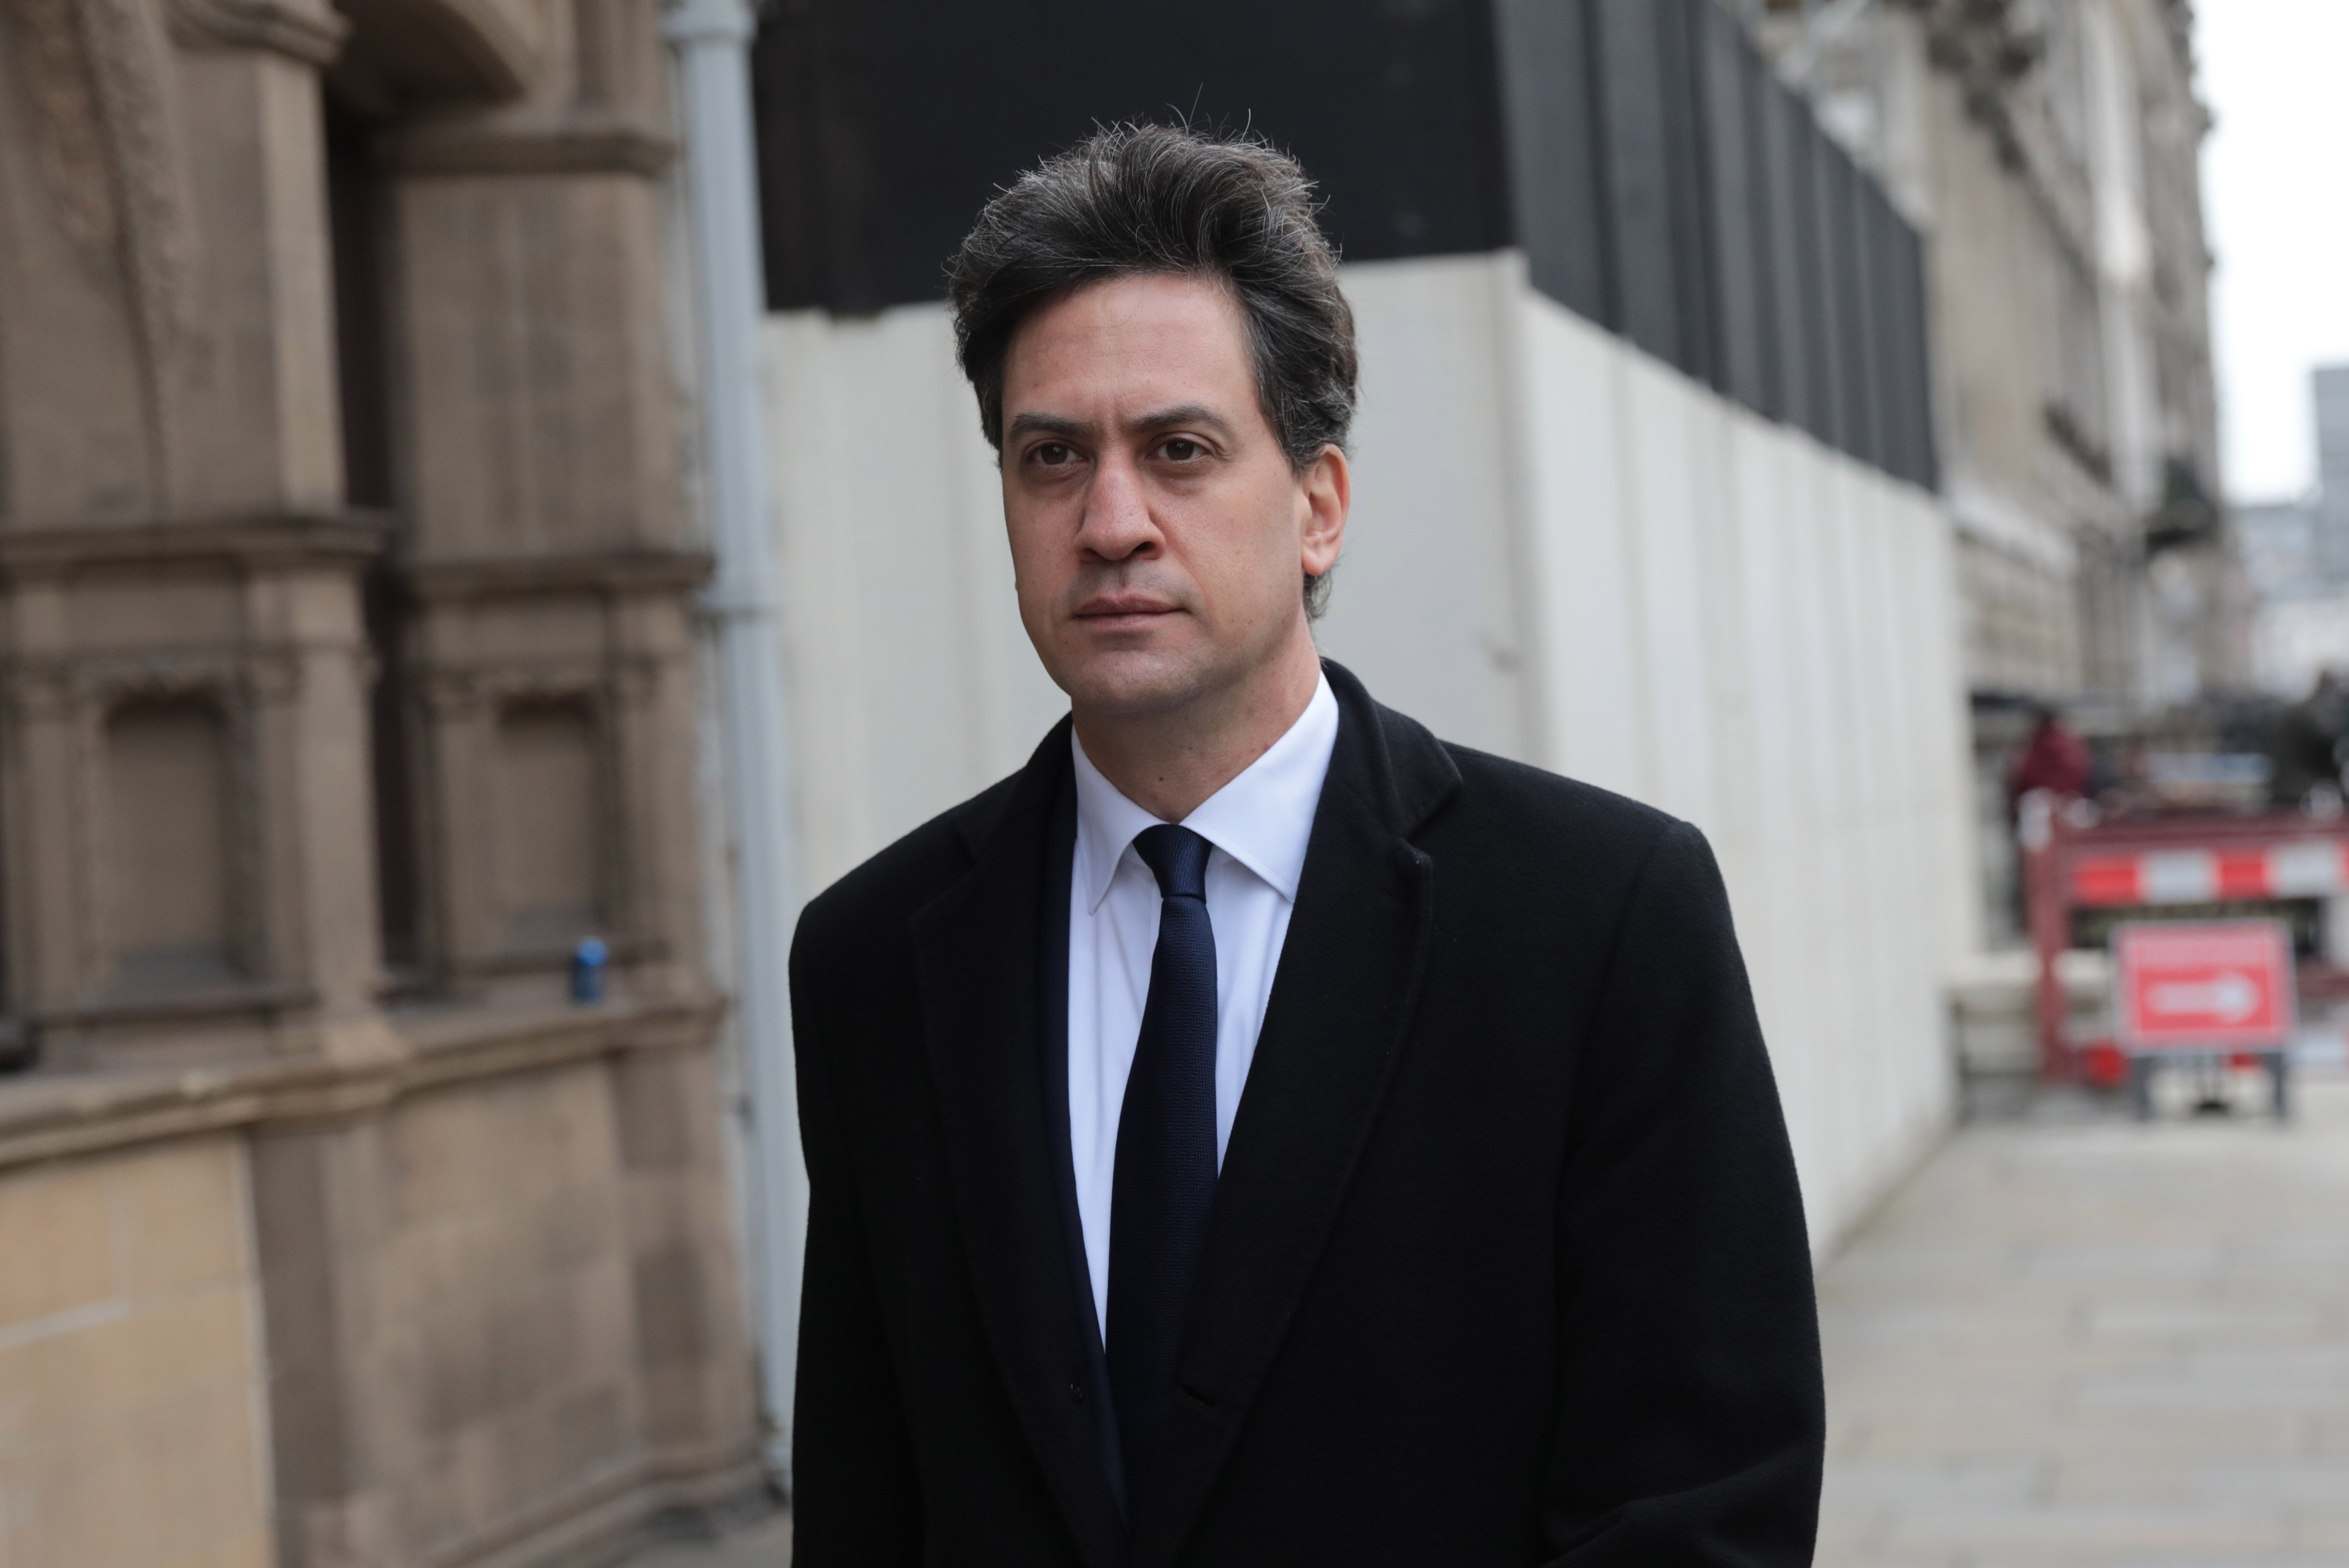 Ed Miliband is Labour’s shadow secretary of state of business, energy, and industrial strategy